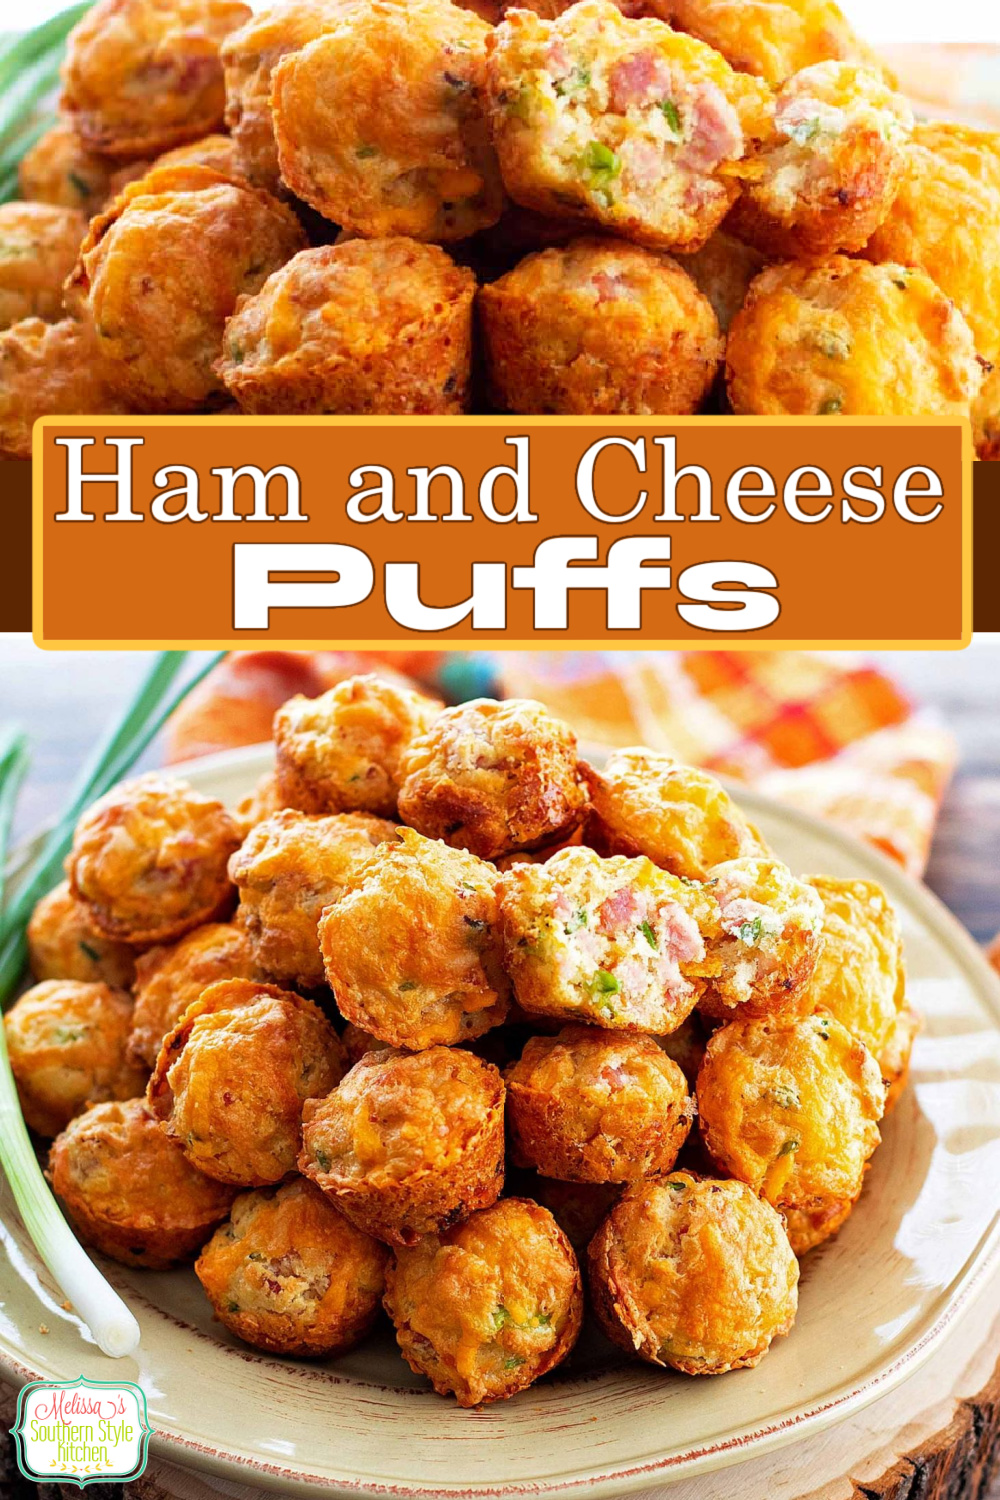 These mini two-bite Ham and Cheese Puffs are guaranteed to be devoured #hamandcheesepuffs #hambites #appetizerrecipes #leftoverhamrecipes #ham #gamedayrecipes #minimuffins #puffs #holidayrecipes #southernfood #southernrecipes #snackrecipes via @melissasssk